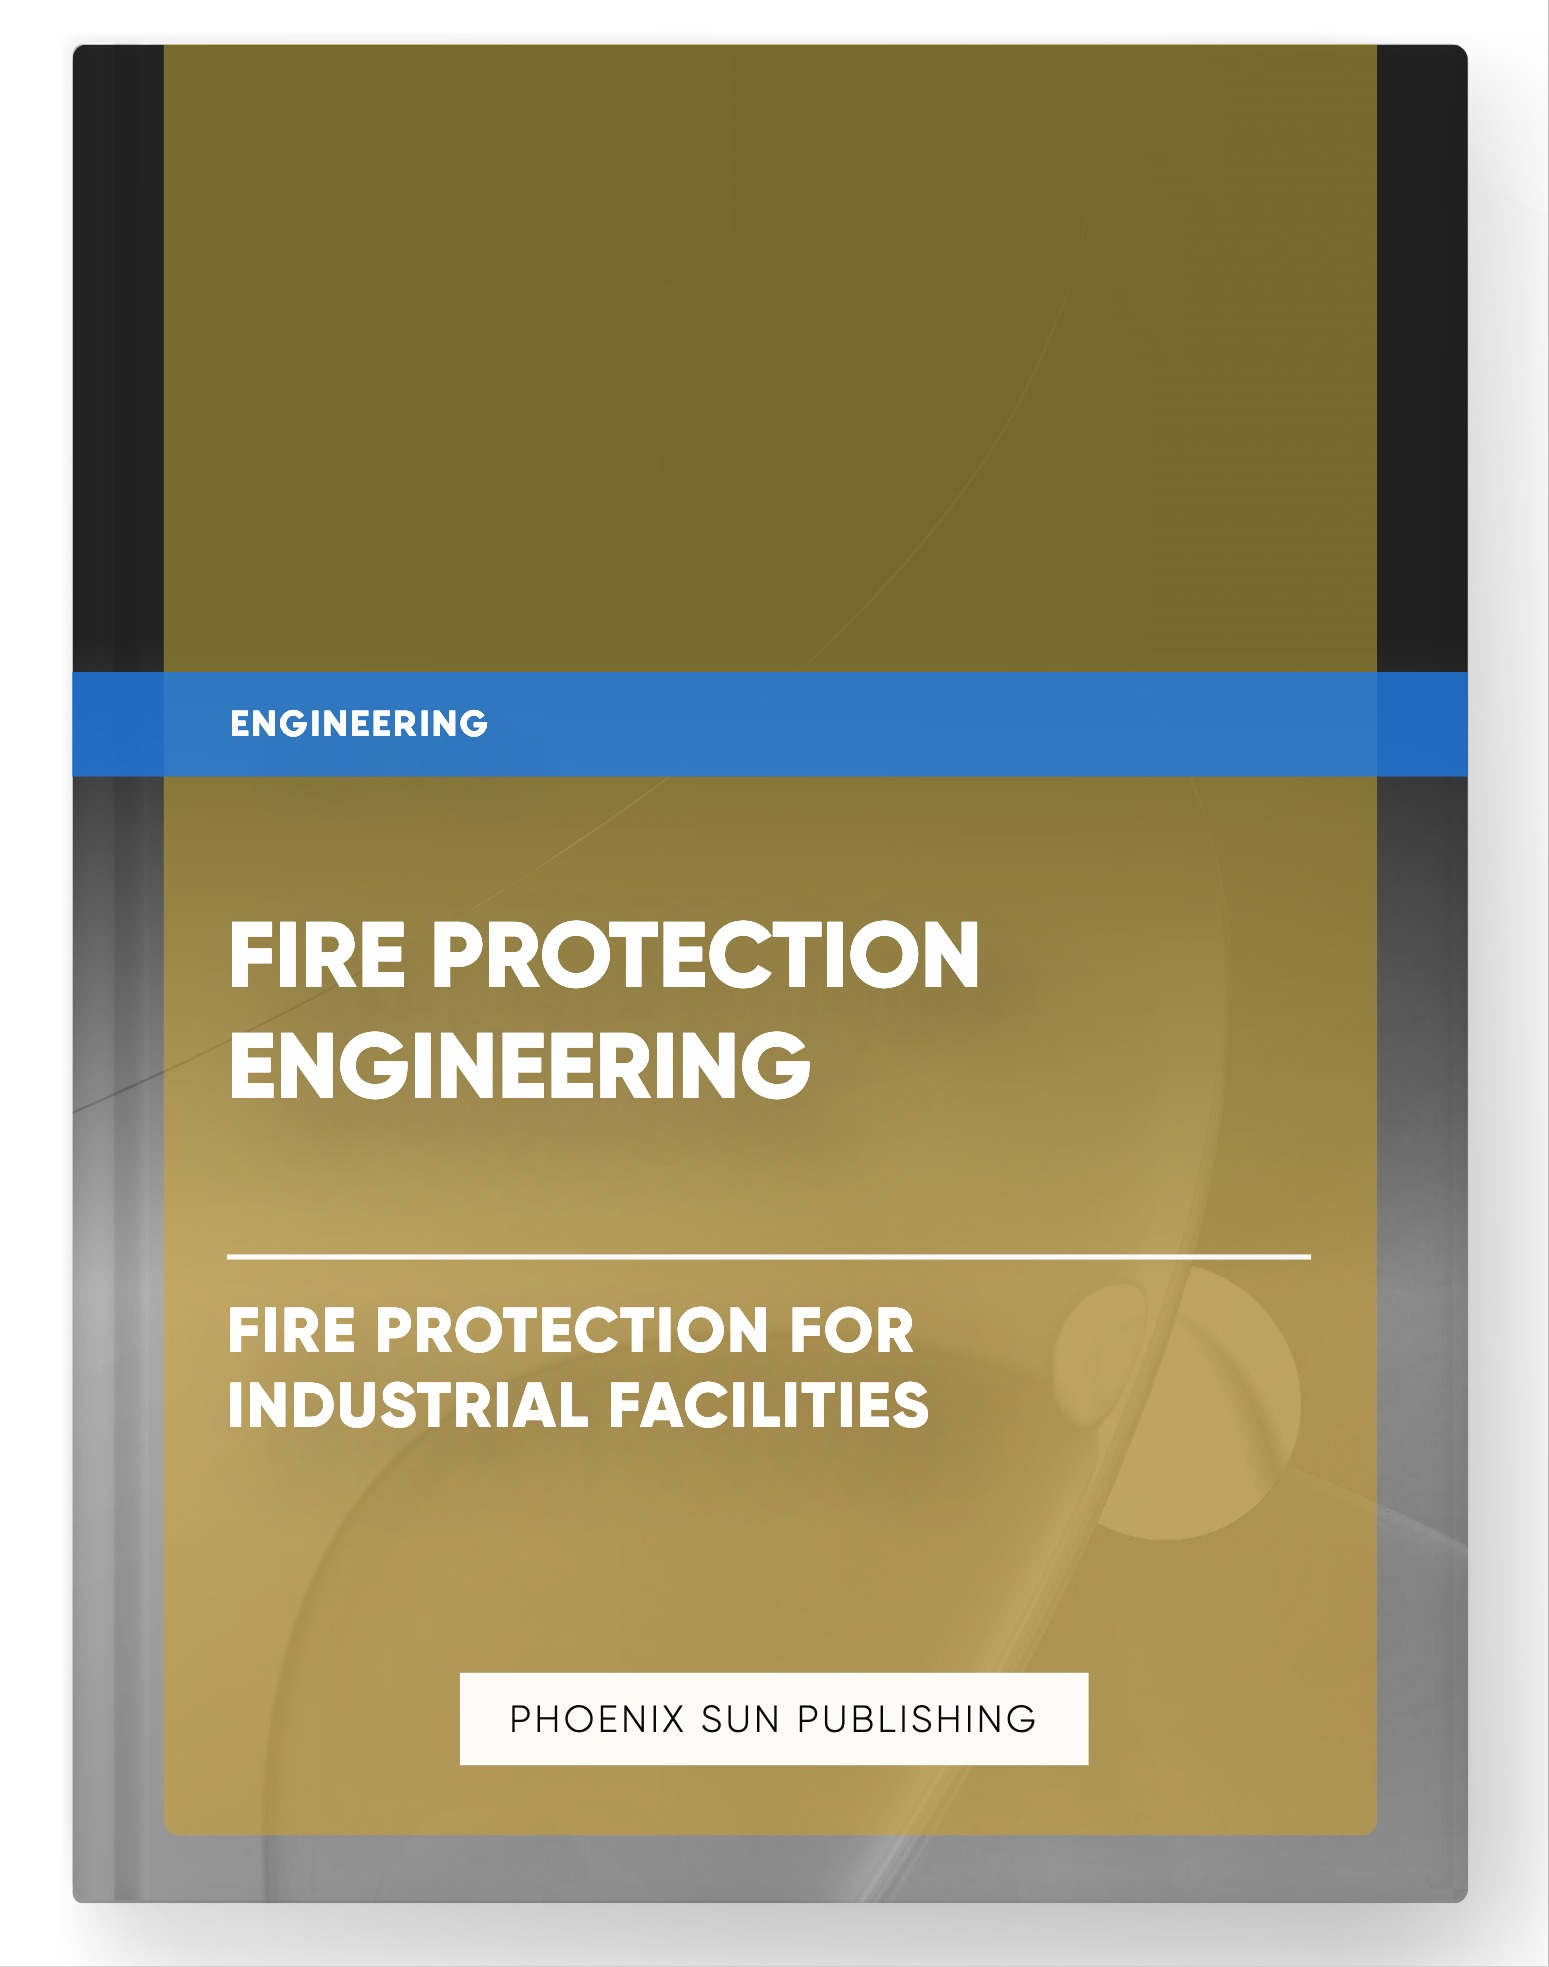 Fire Protection Engineering – Fire Protection for Industrial Facilities